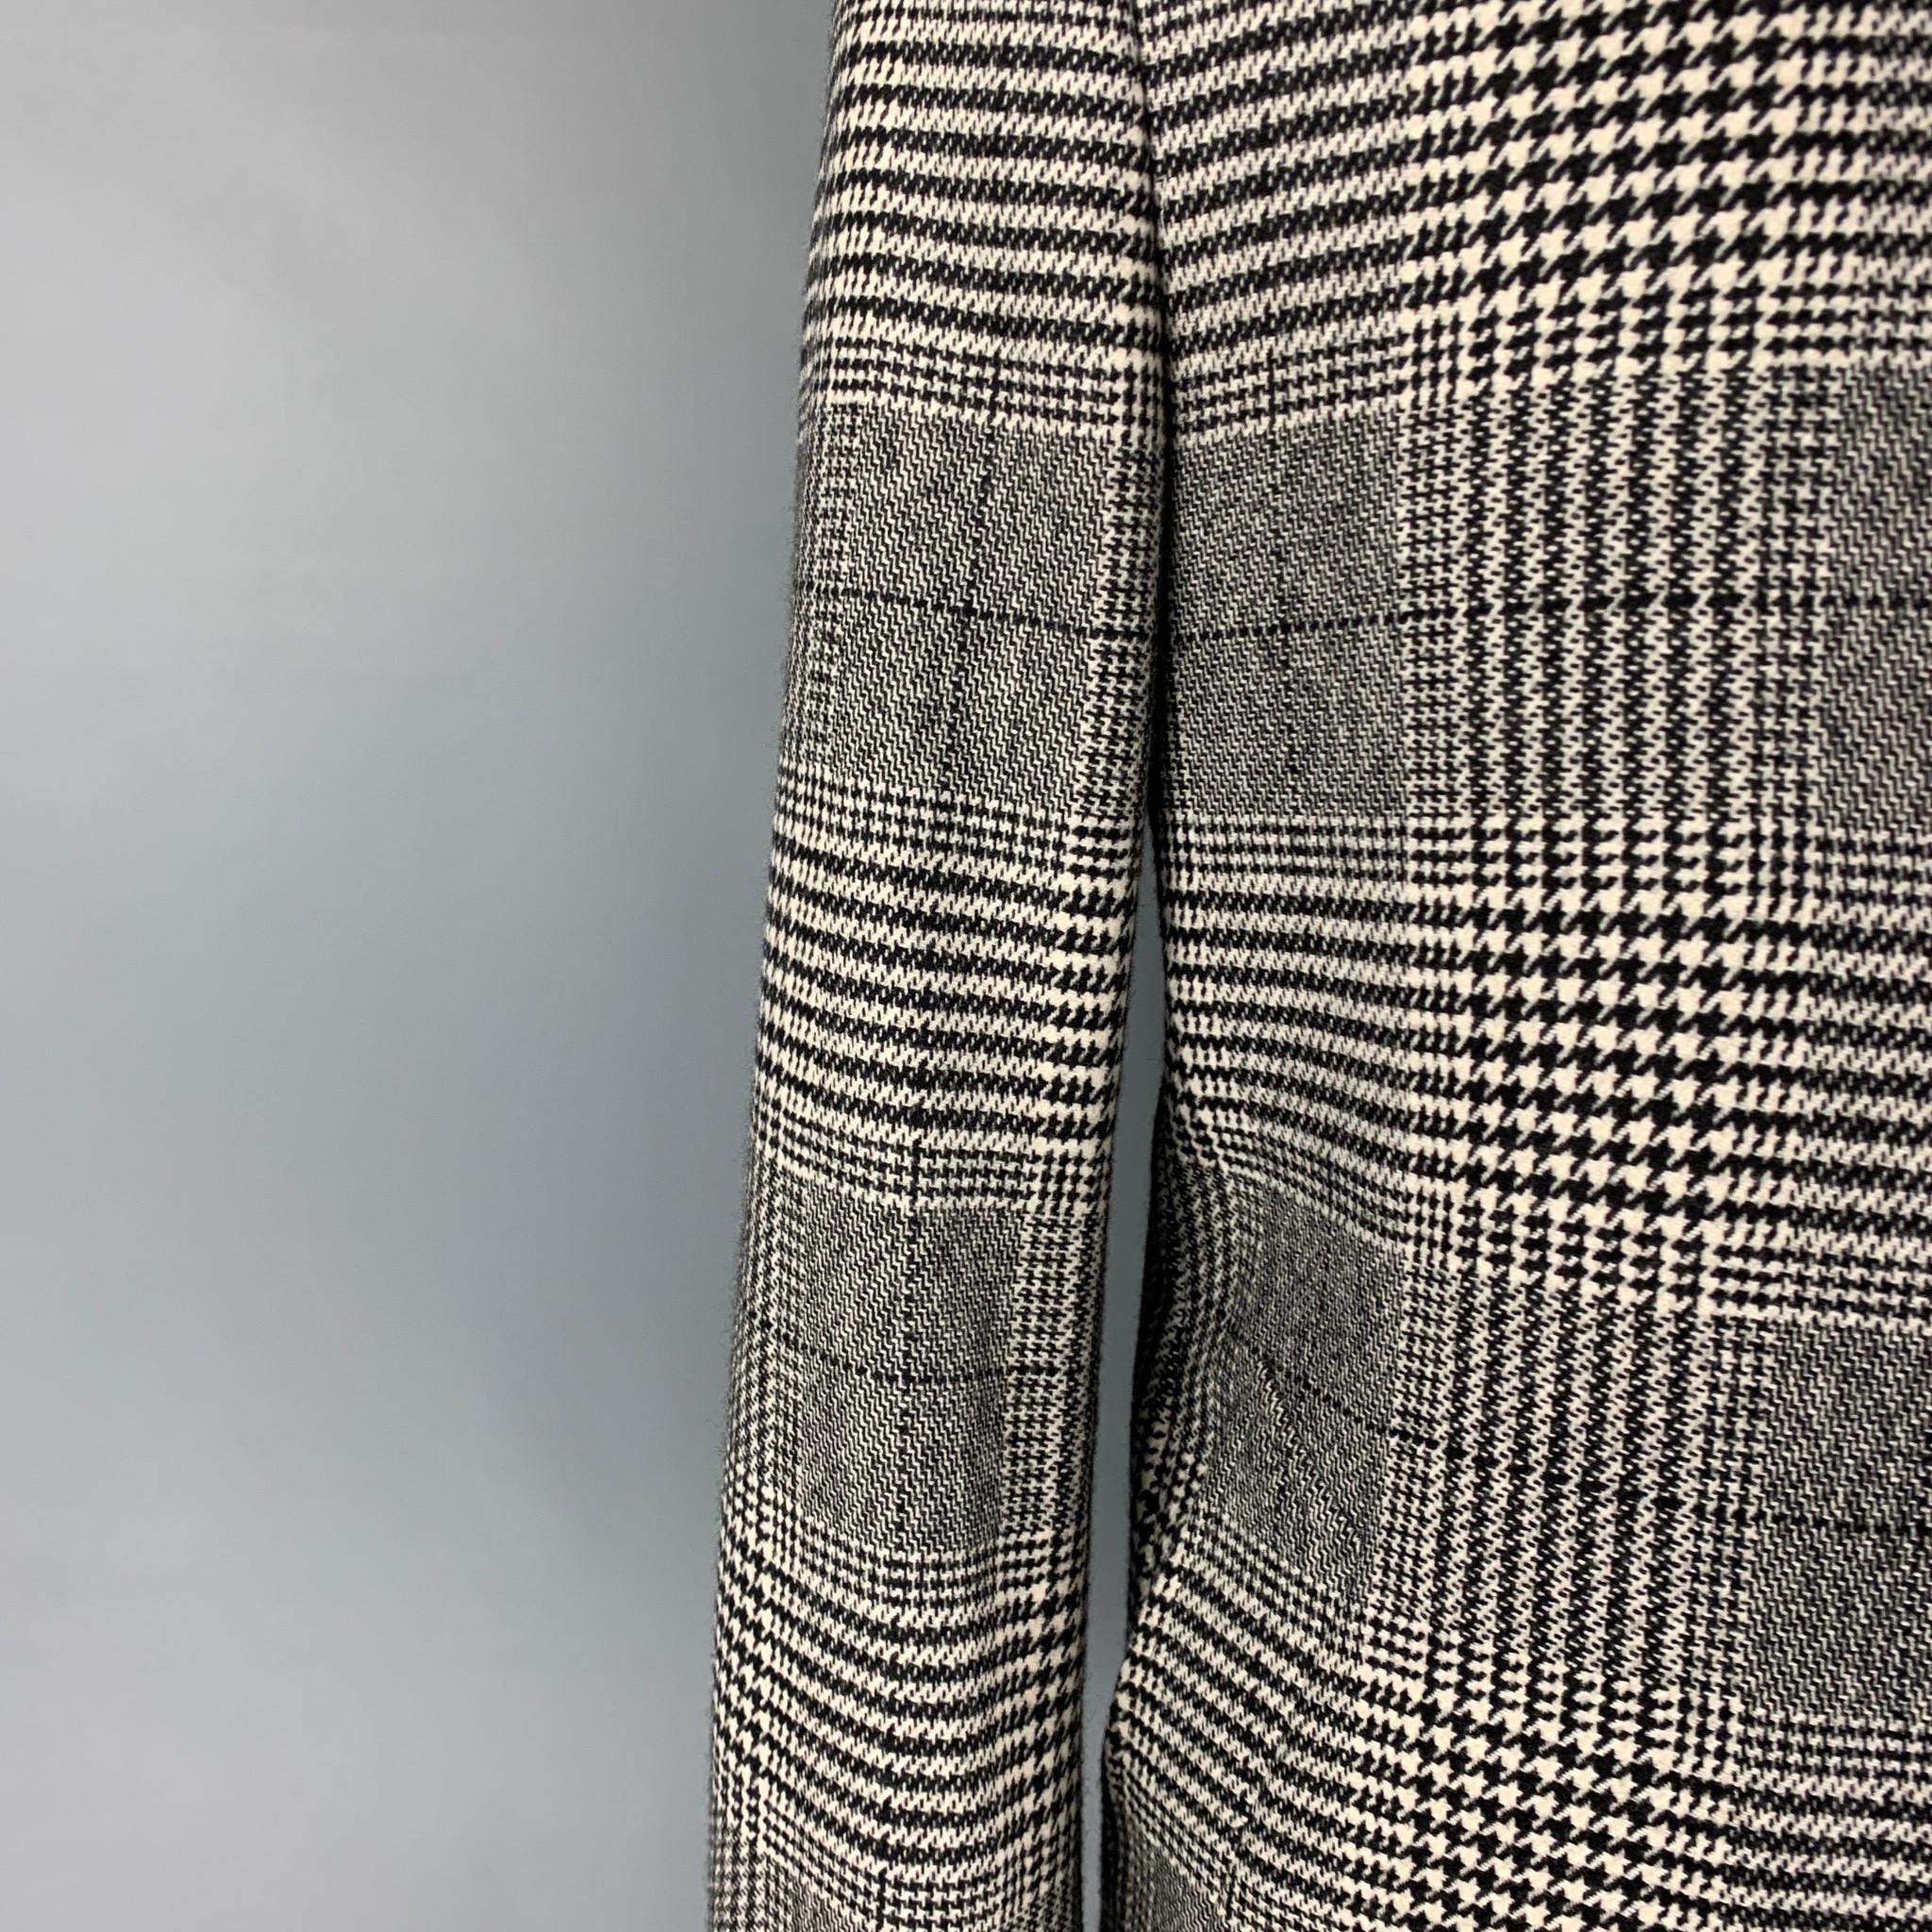 DUNHILL coat comes in a black & white plaid wool / cashmere with a half liner featuring a spread collar, slit pockets, single back vent, buttoned cuffs, and a buttoned closure. Made in Italy. 

Excellent Pre-Owned Condition.
Marked: